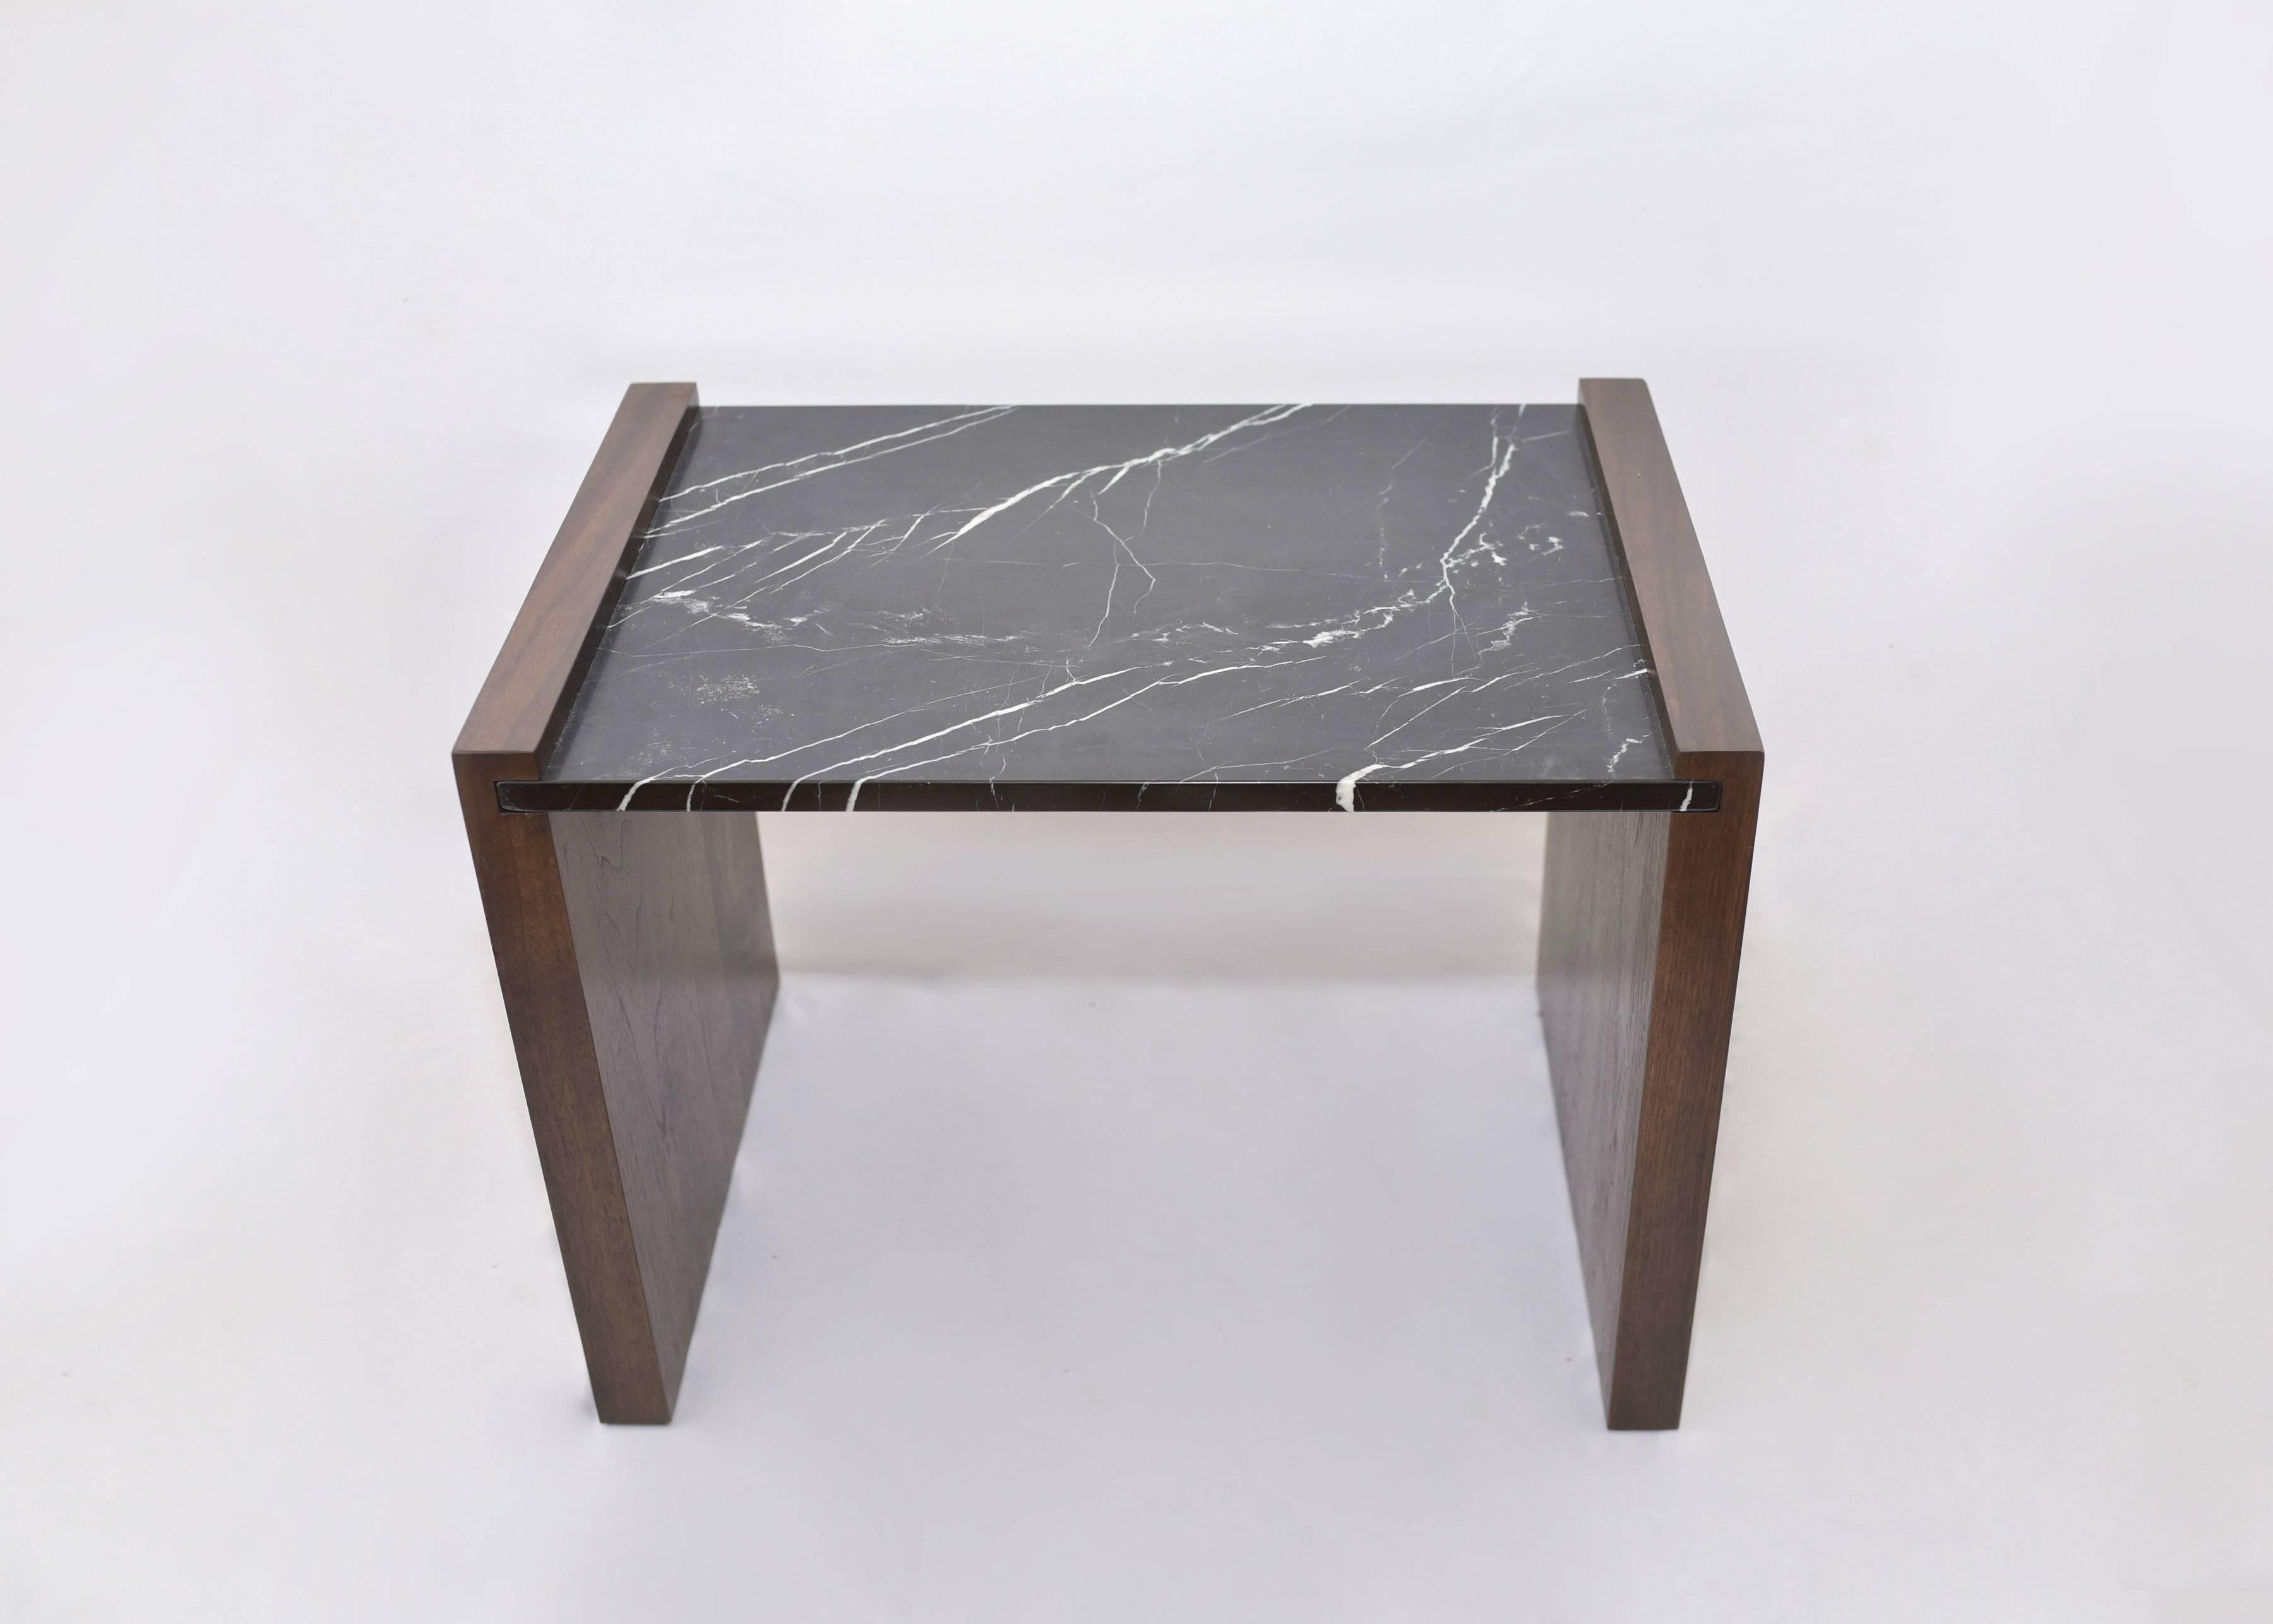 A simple side table with your choice of wood and marble finishes. Use alone or nested with the Thomas glass side table.